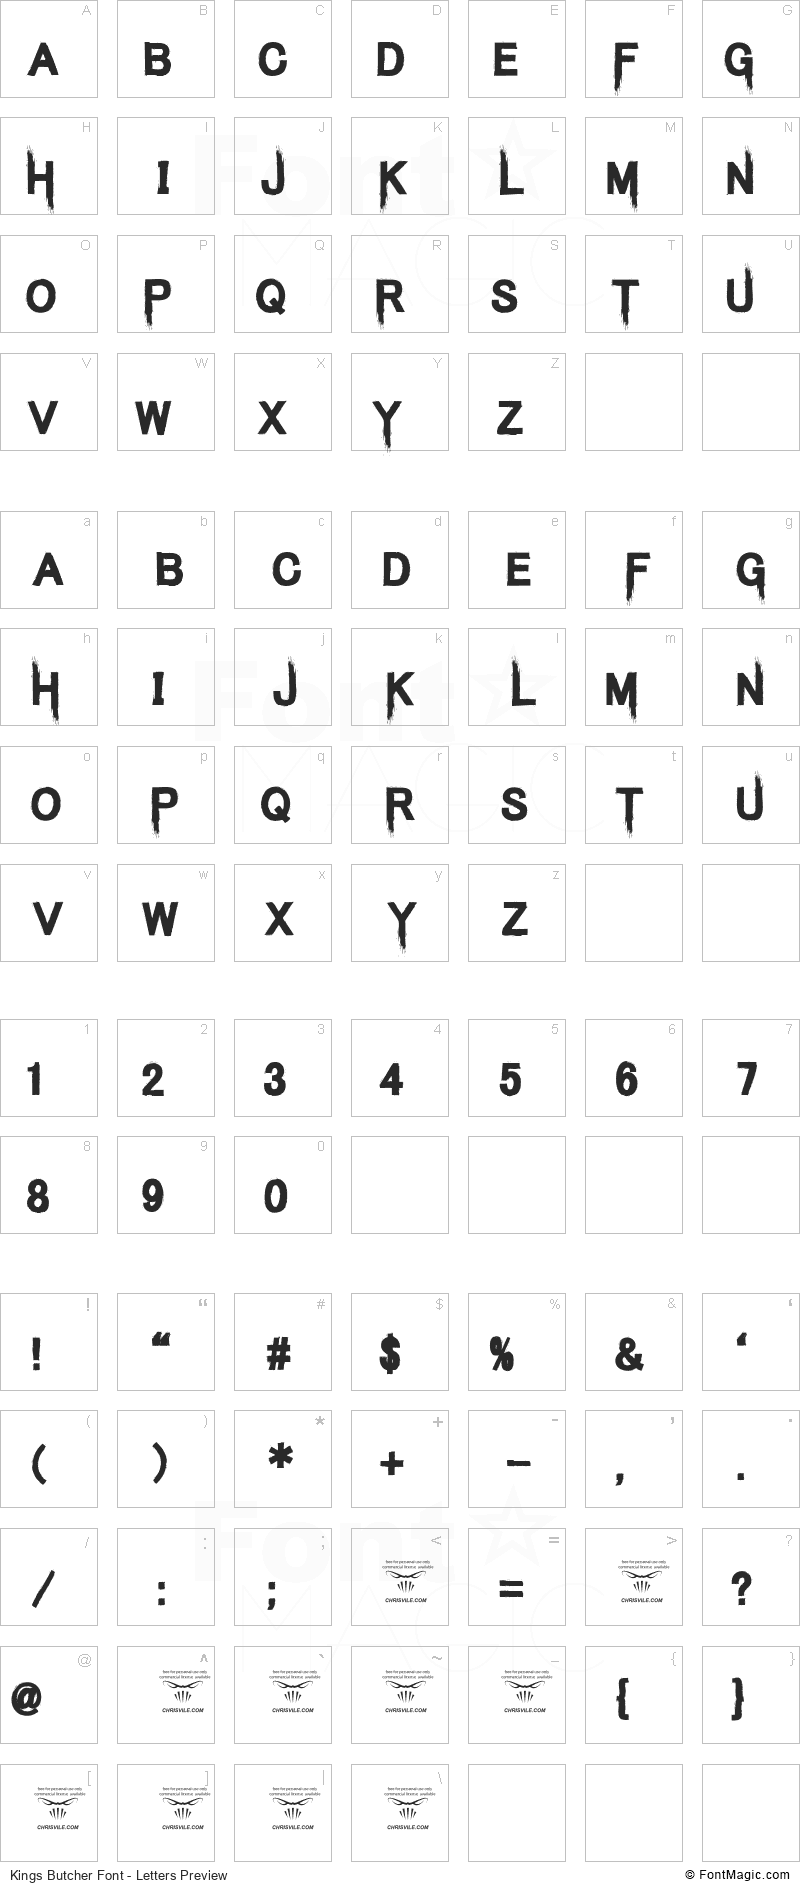 Kings Butcher Font - All Latters Preview Chart